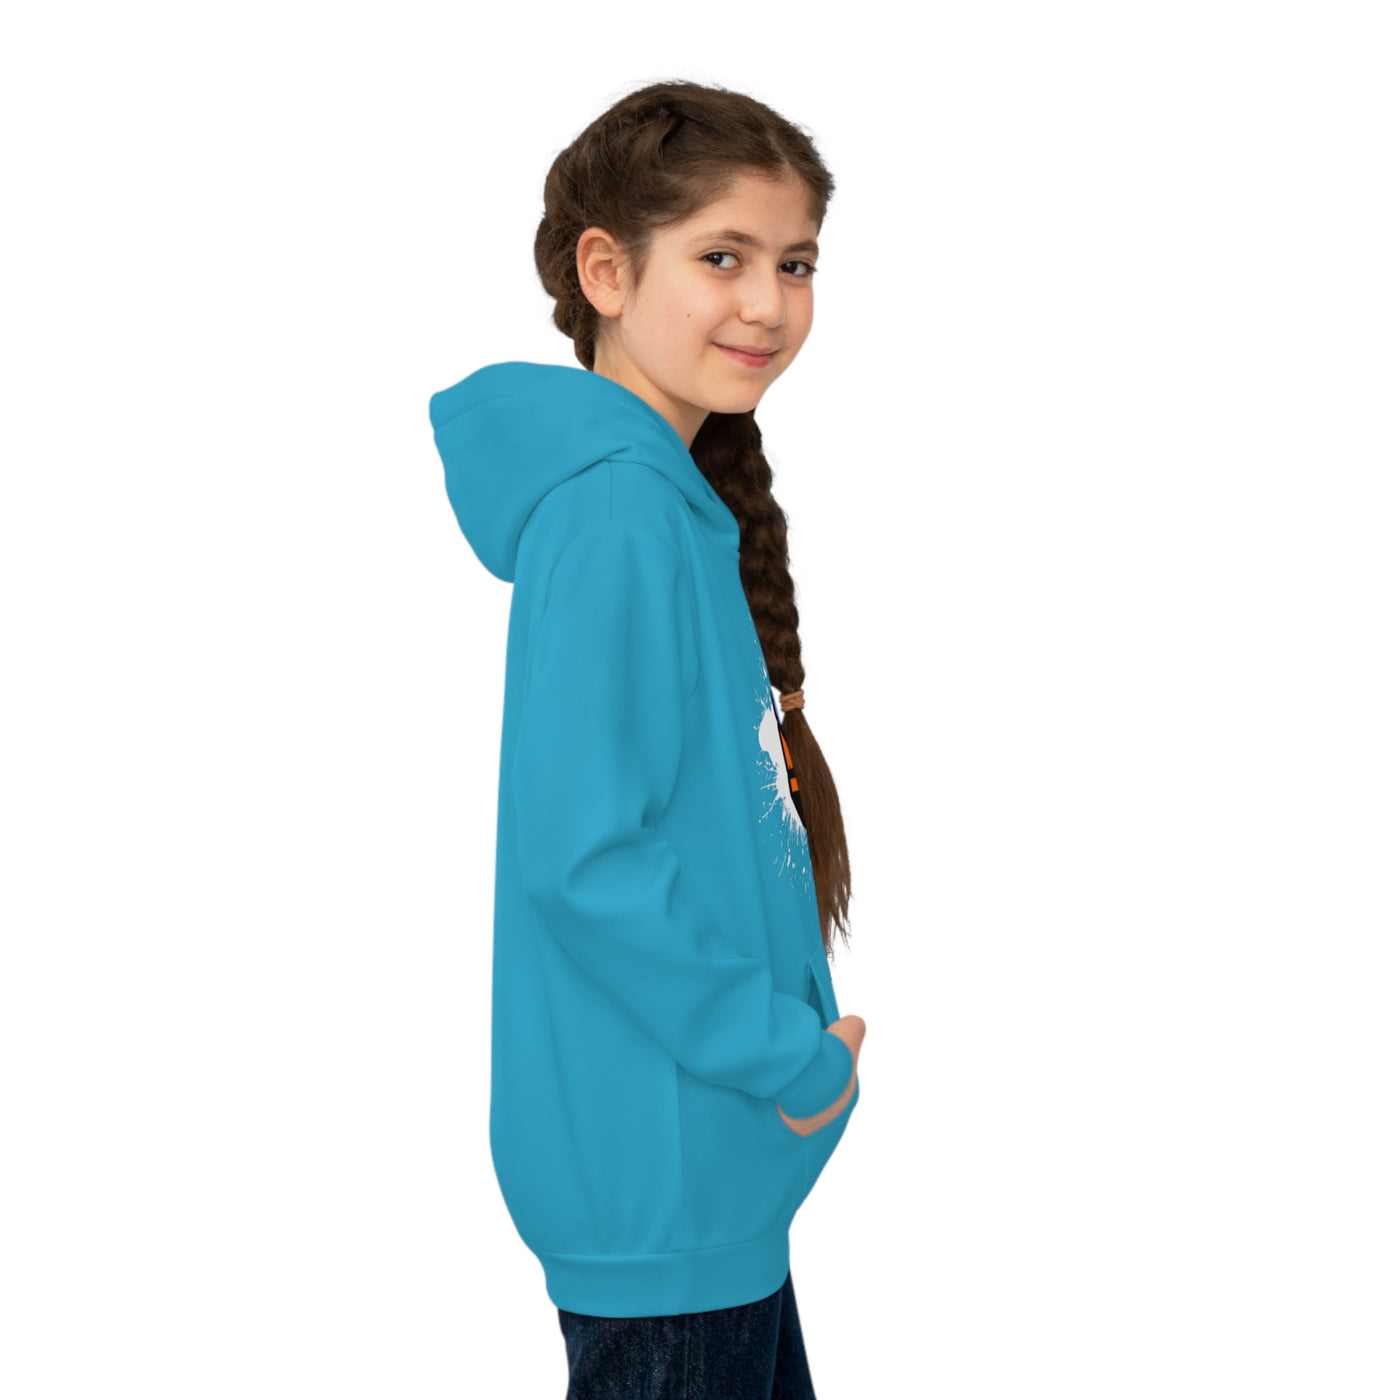 Colorful Crown Kids Hoodie (Turquoise) Sublimation